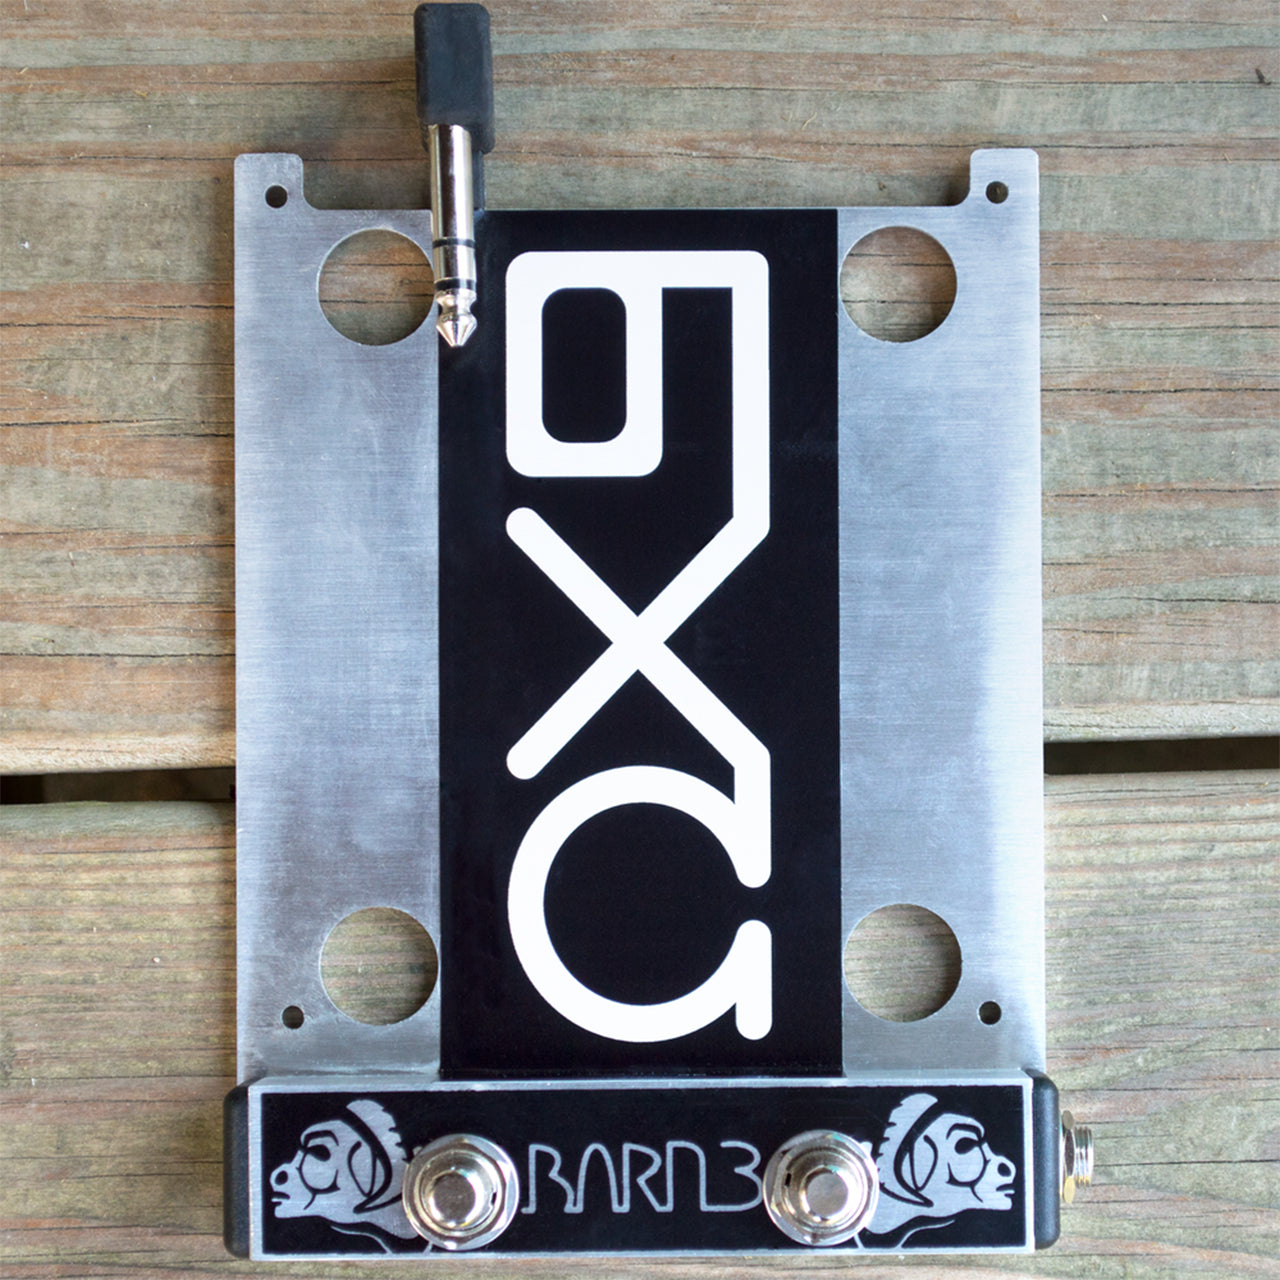 Barn3 OX9 Dual Footswitch For Eventide H9 | For Sale | Replay 